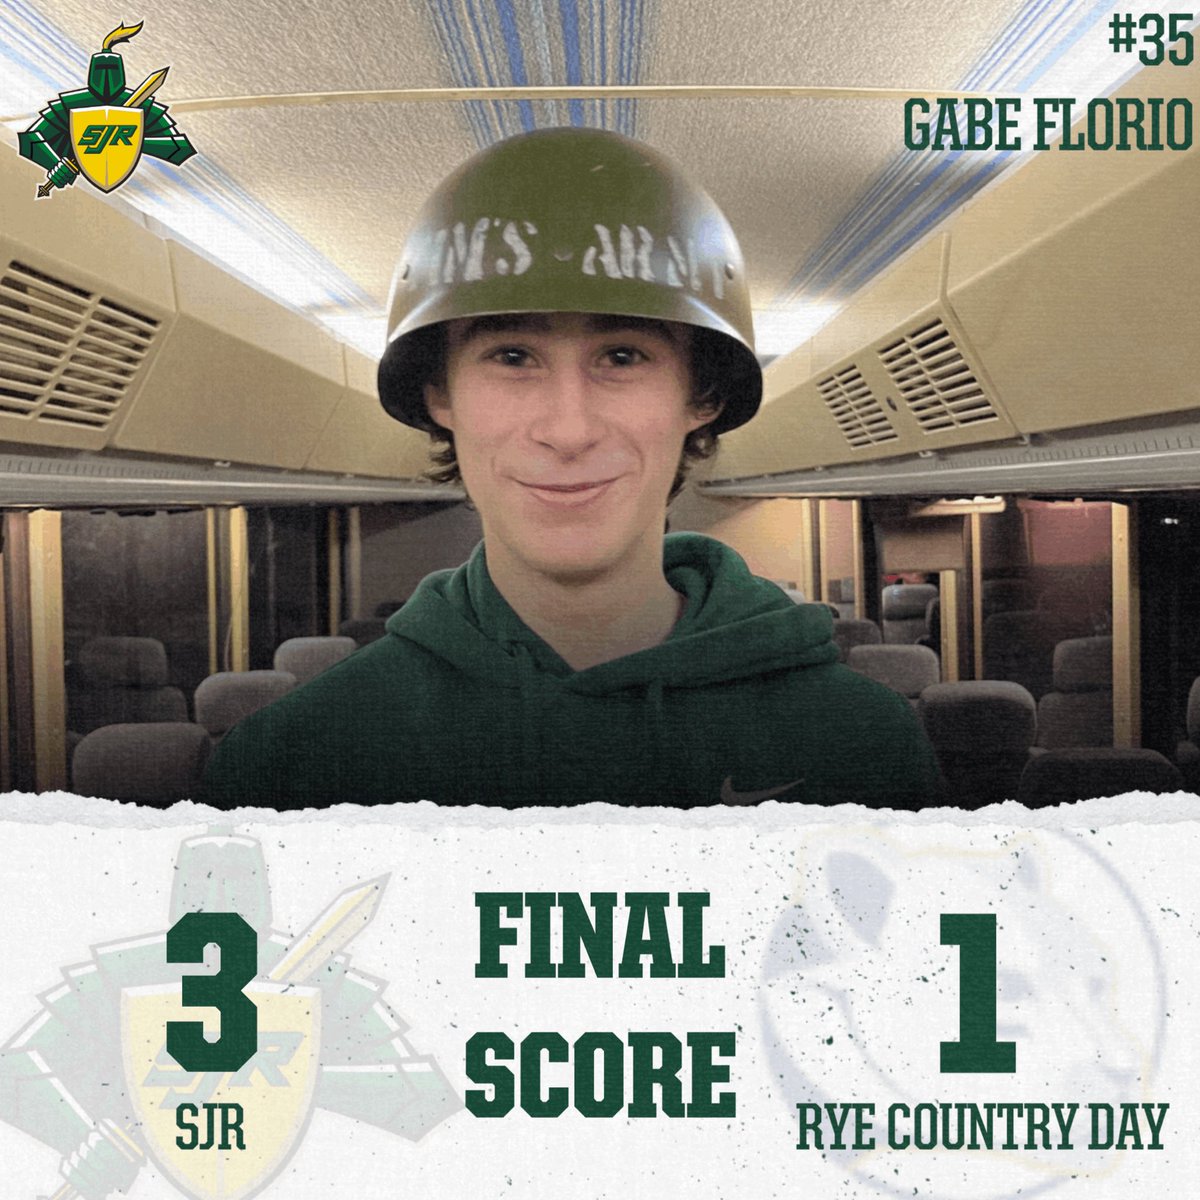 🔰 GREEN KNIGHTS WIN🔰

The Green Knights finish out the regular season with a W!

🚨: Hughes, Tobin, Perrone

🍏: Perrone, Kondratowicz, Chang

🥅: Florio: 17 saves

Round one of states is on Sunday against Frisch.

#WeAreSJR🔰